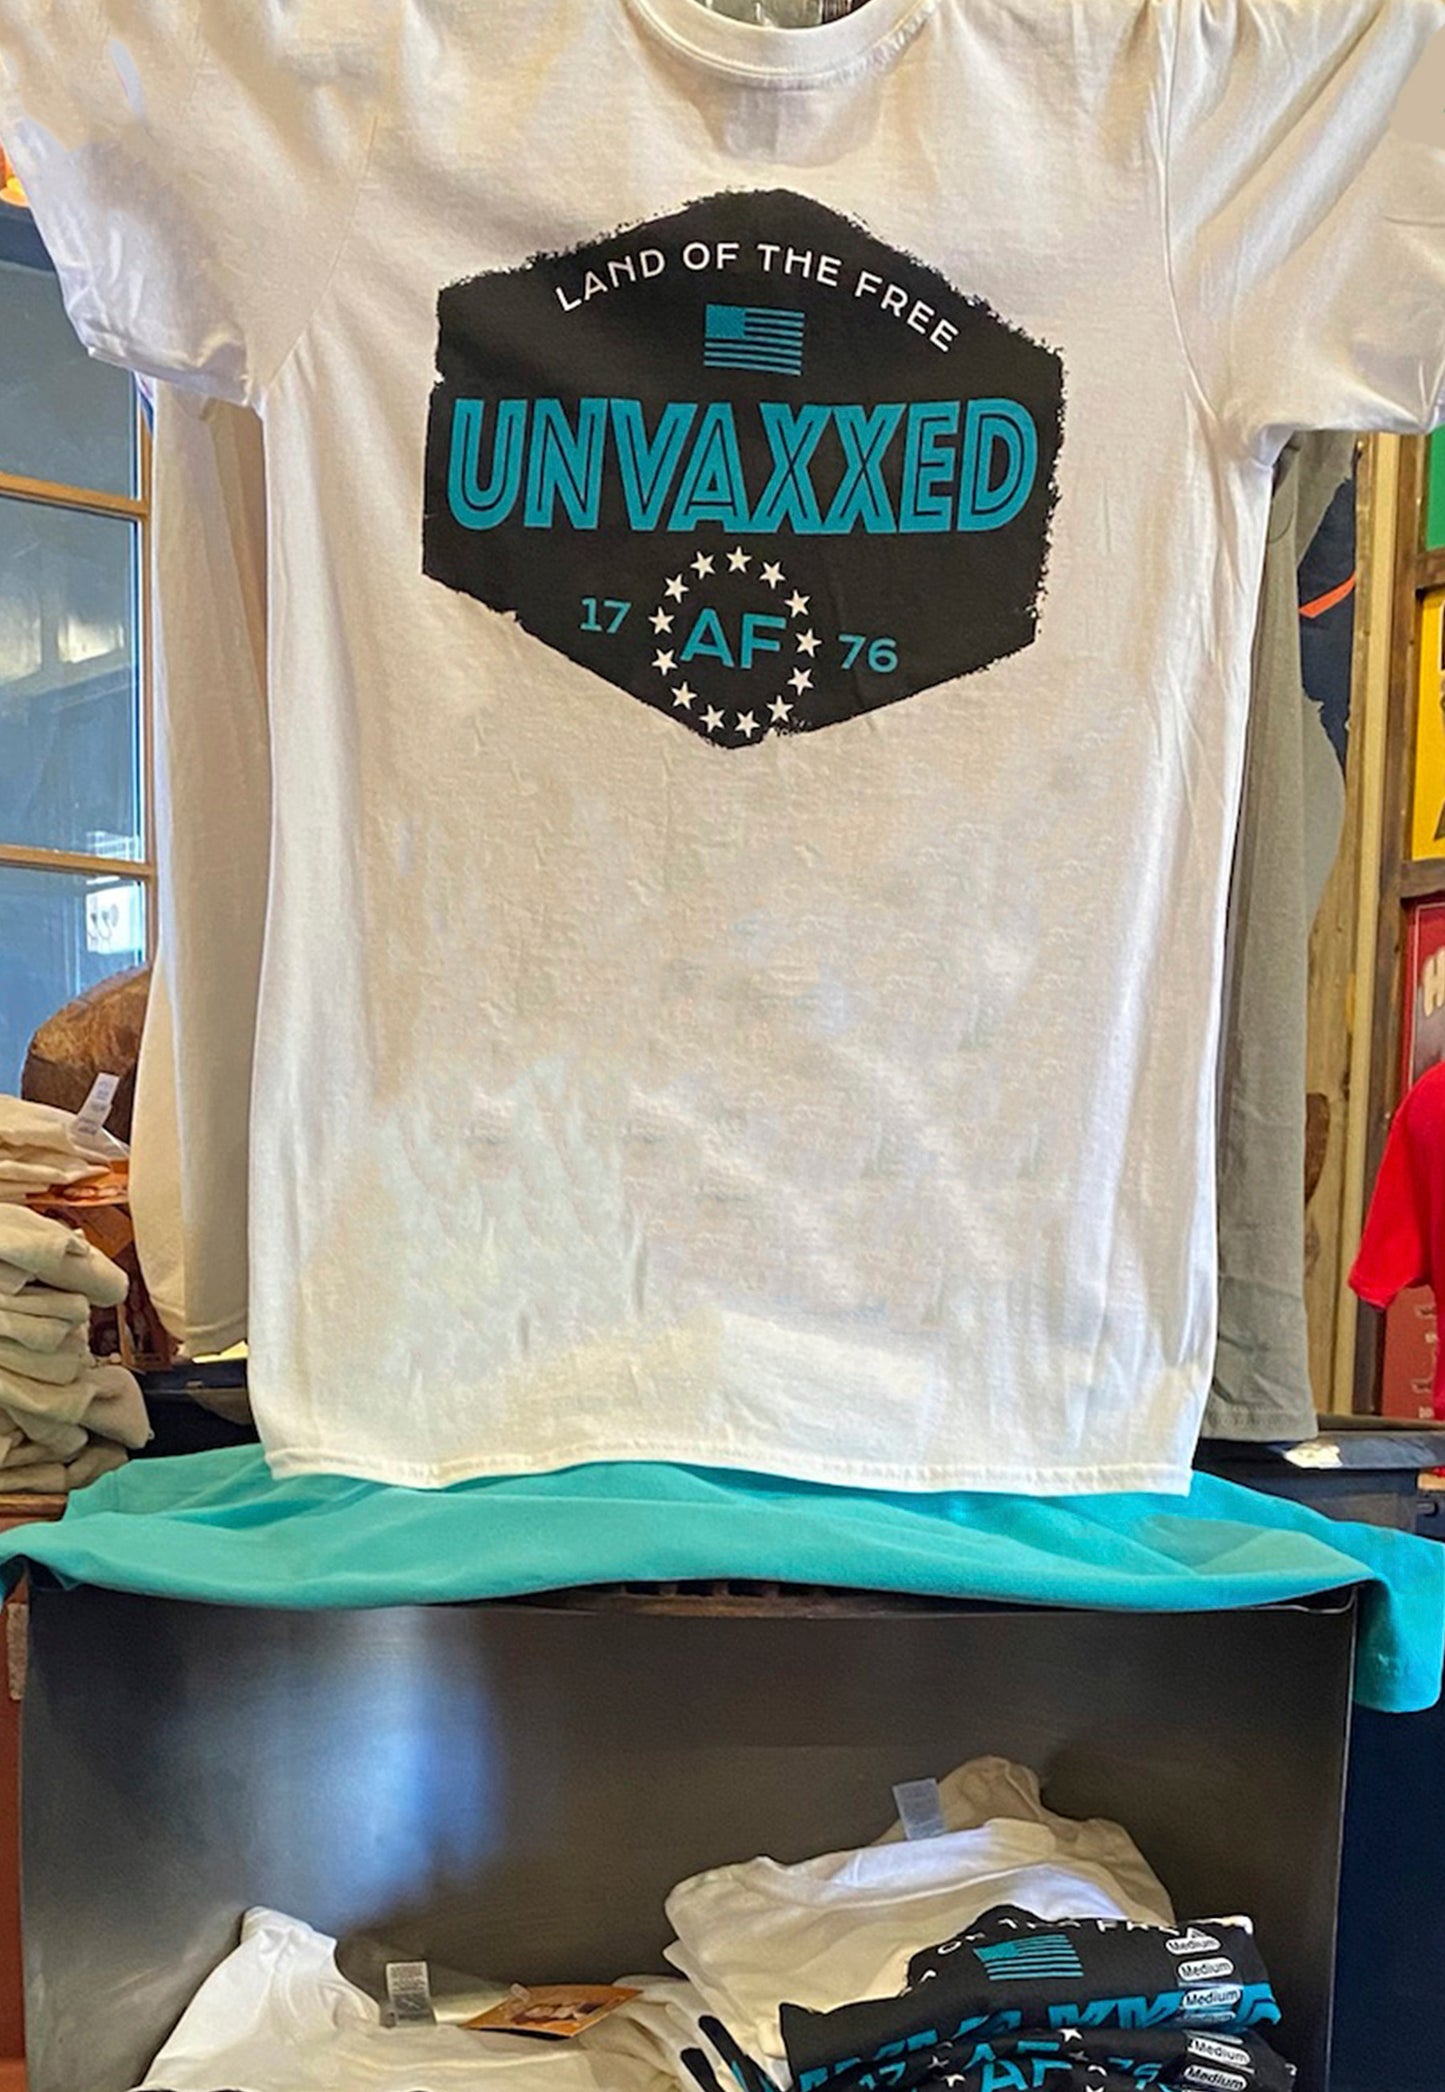 anti vaccine shirt for sale in retail store